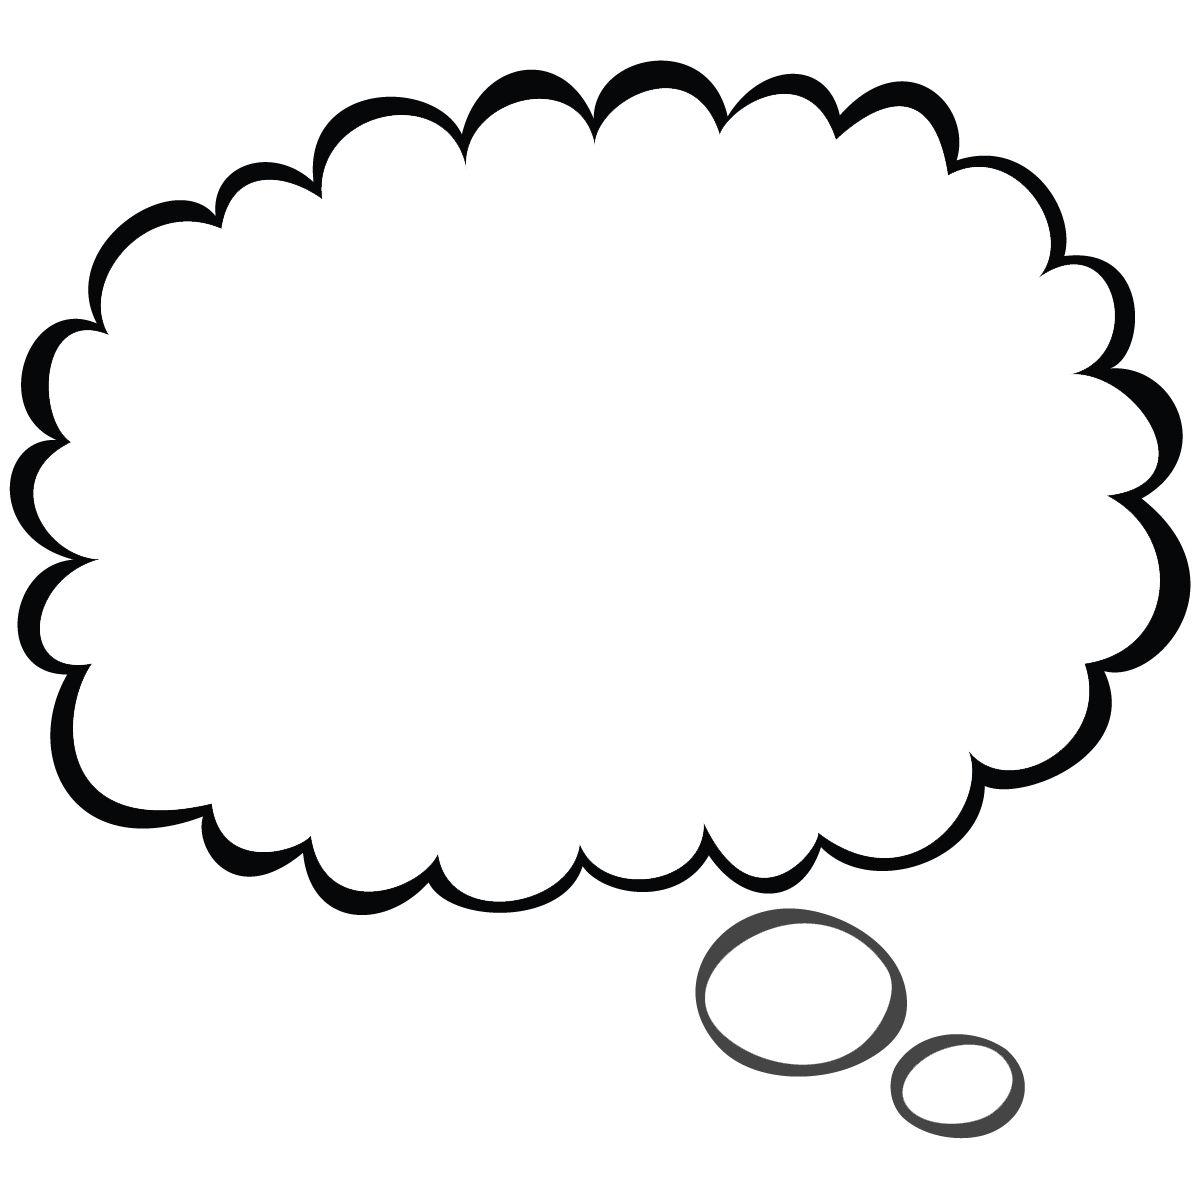 Free Thought Bubbles Clipart, Download Free Thought Bubbles Clipart png